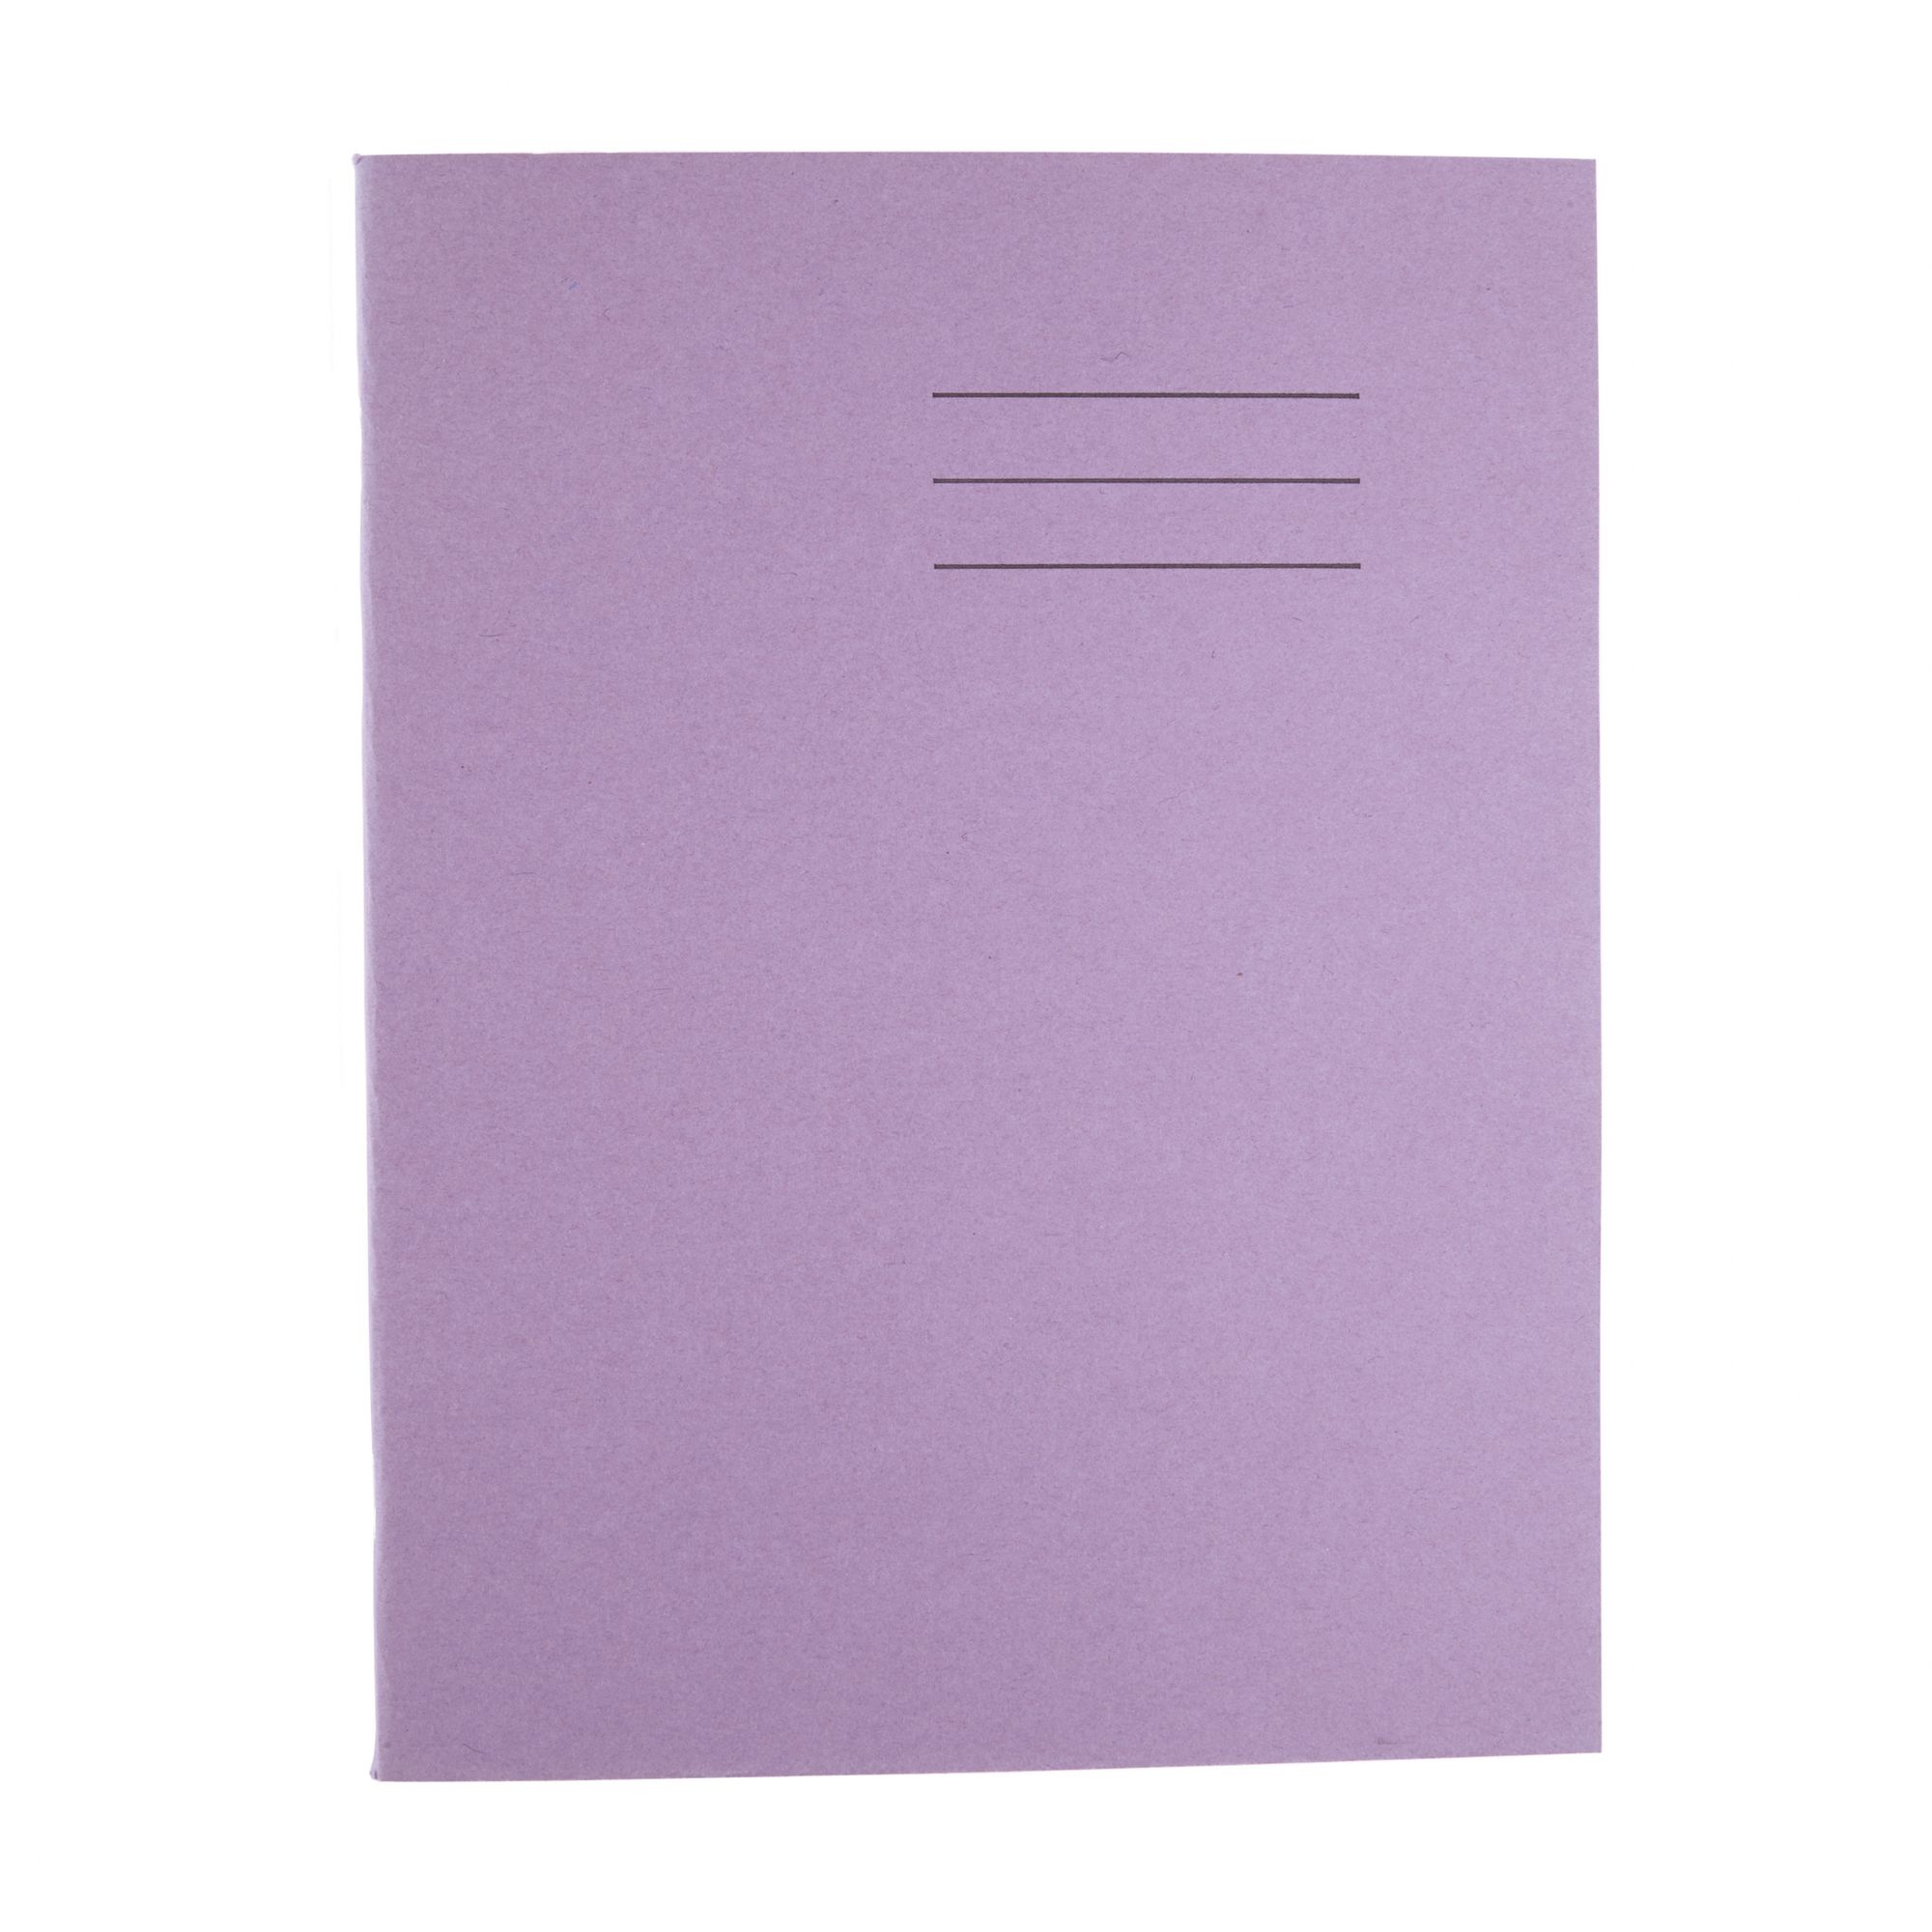 A4 Exercise Book 32 Page, 20mm Squared, Purple - Pack of 100